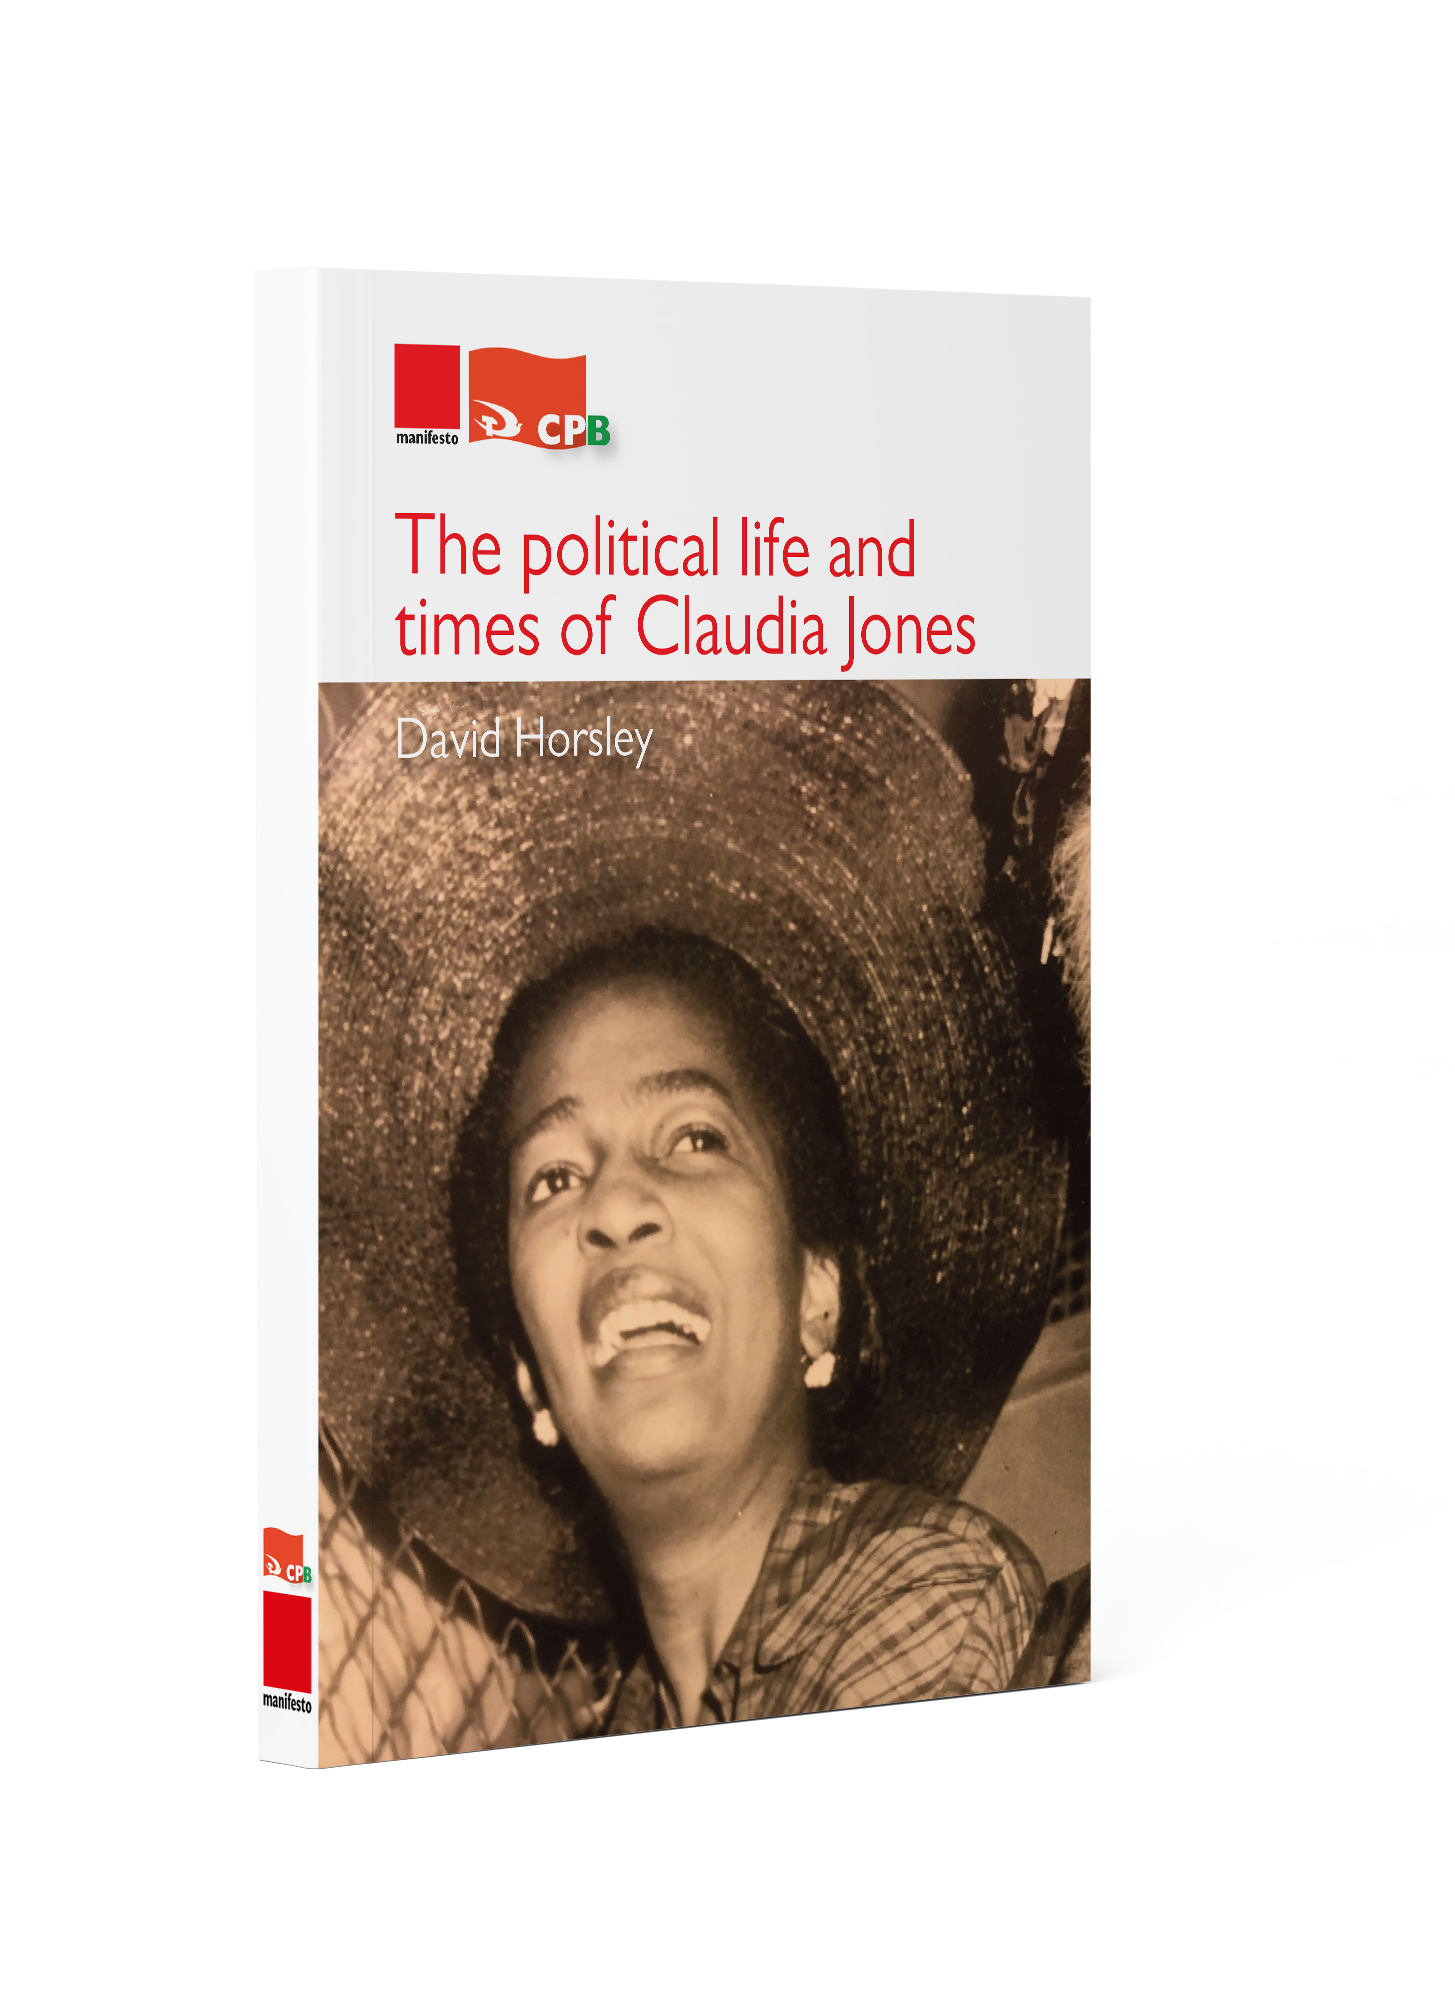 The political life and times of Claudia Jones